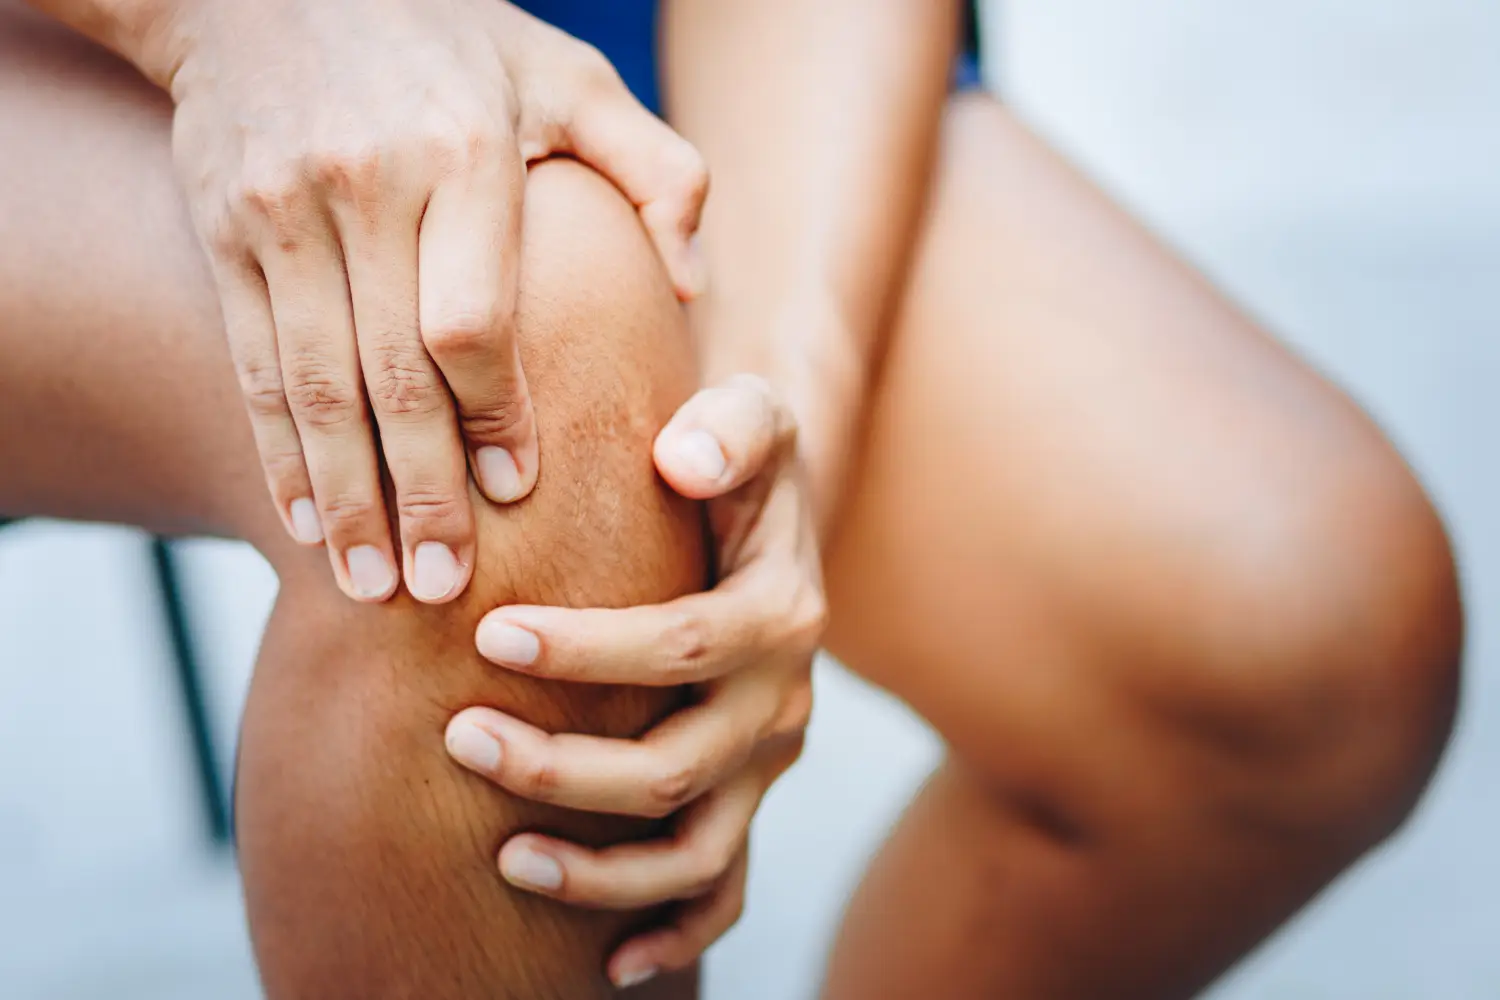 How Much Compensation For A Knee Injury At Work?